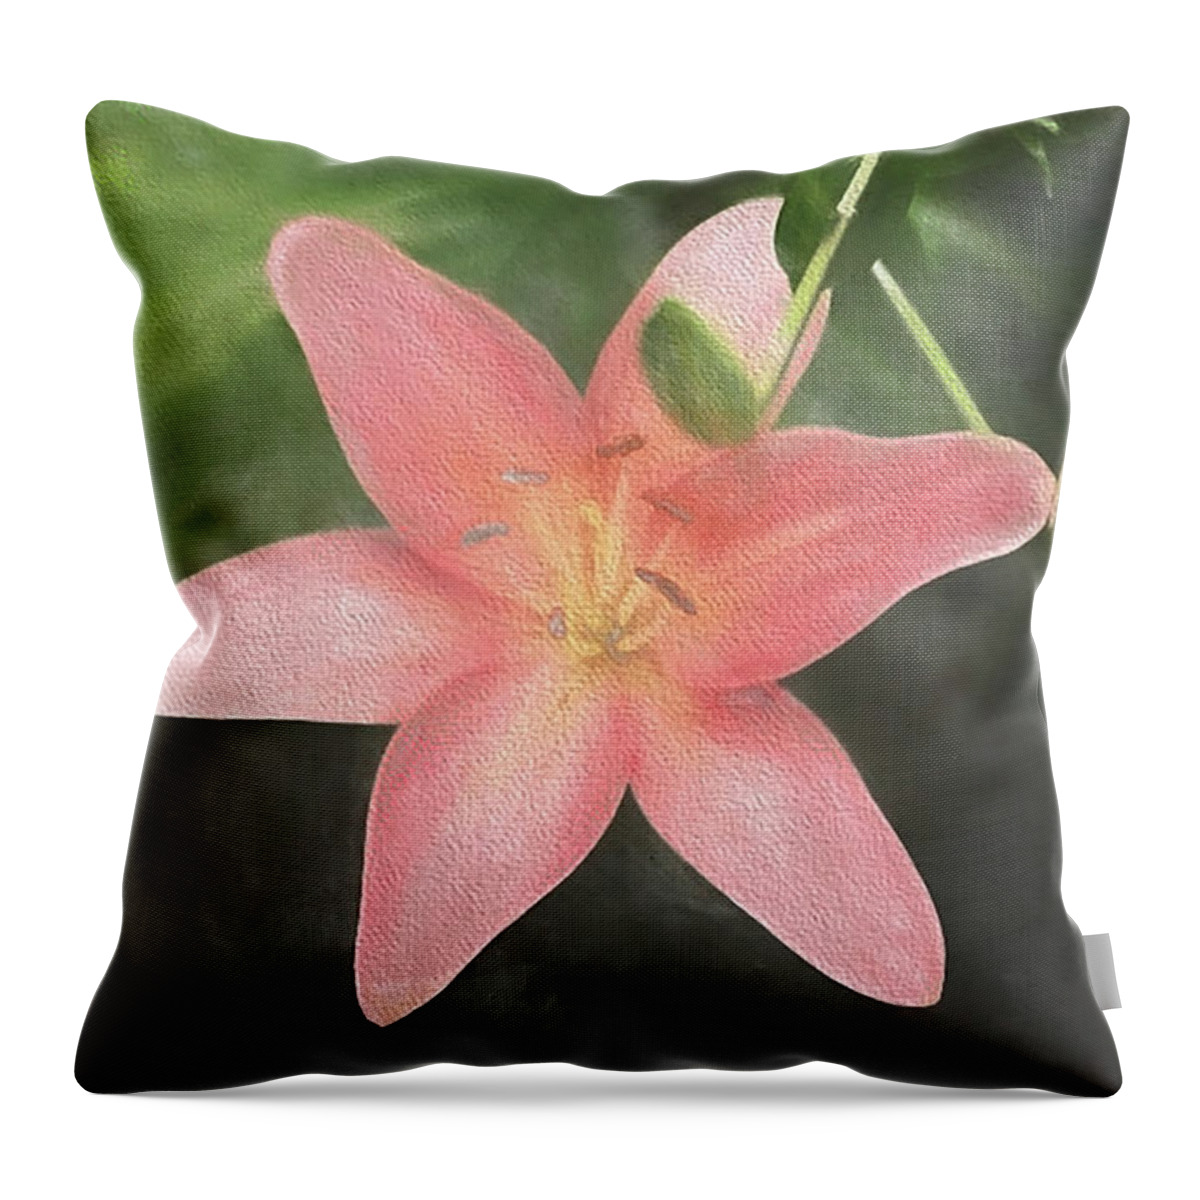 Flowers Throw Pillow featuring the photograph A Lone Lily by Renette Coachman